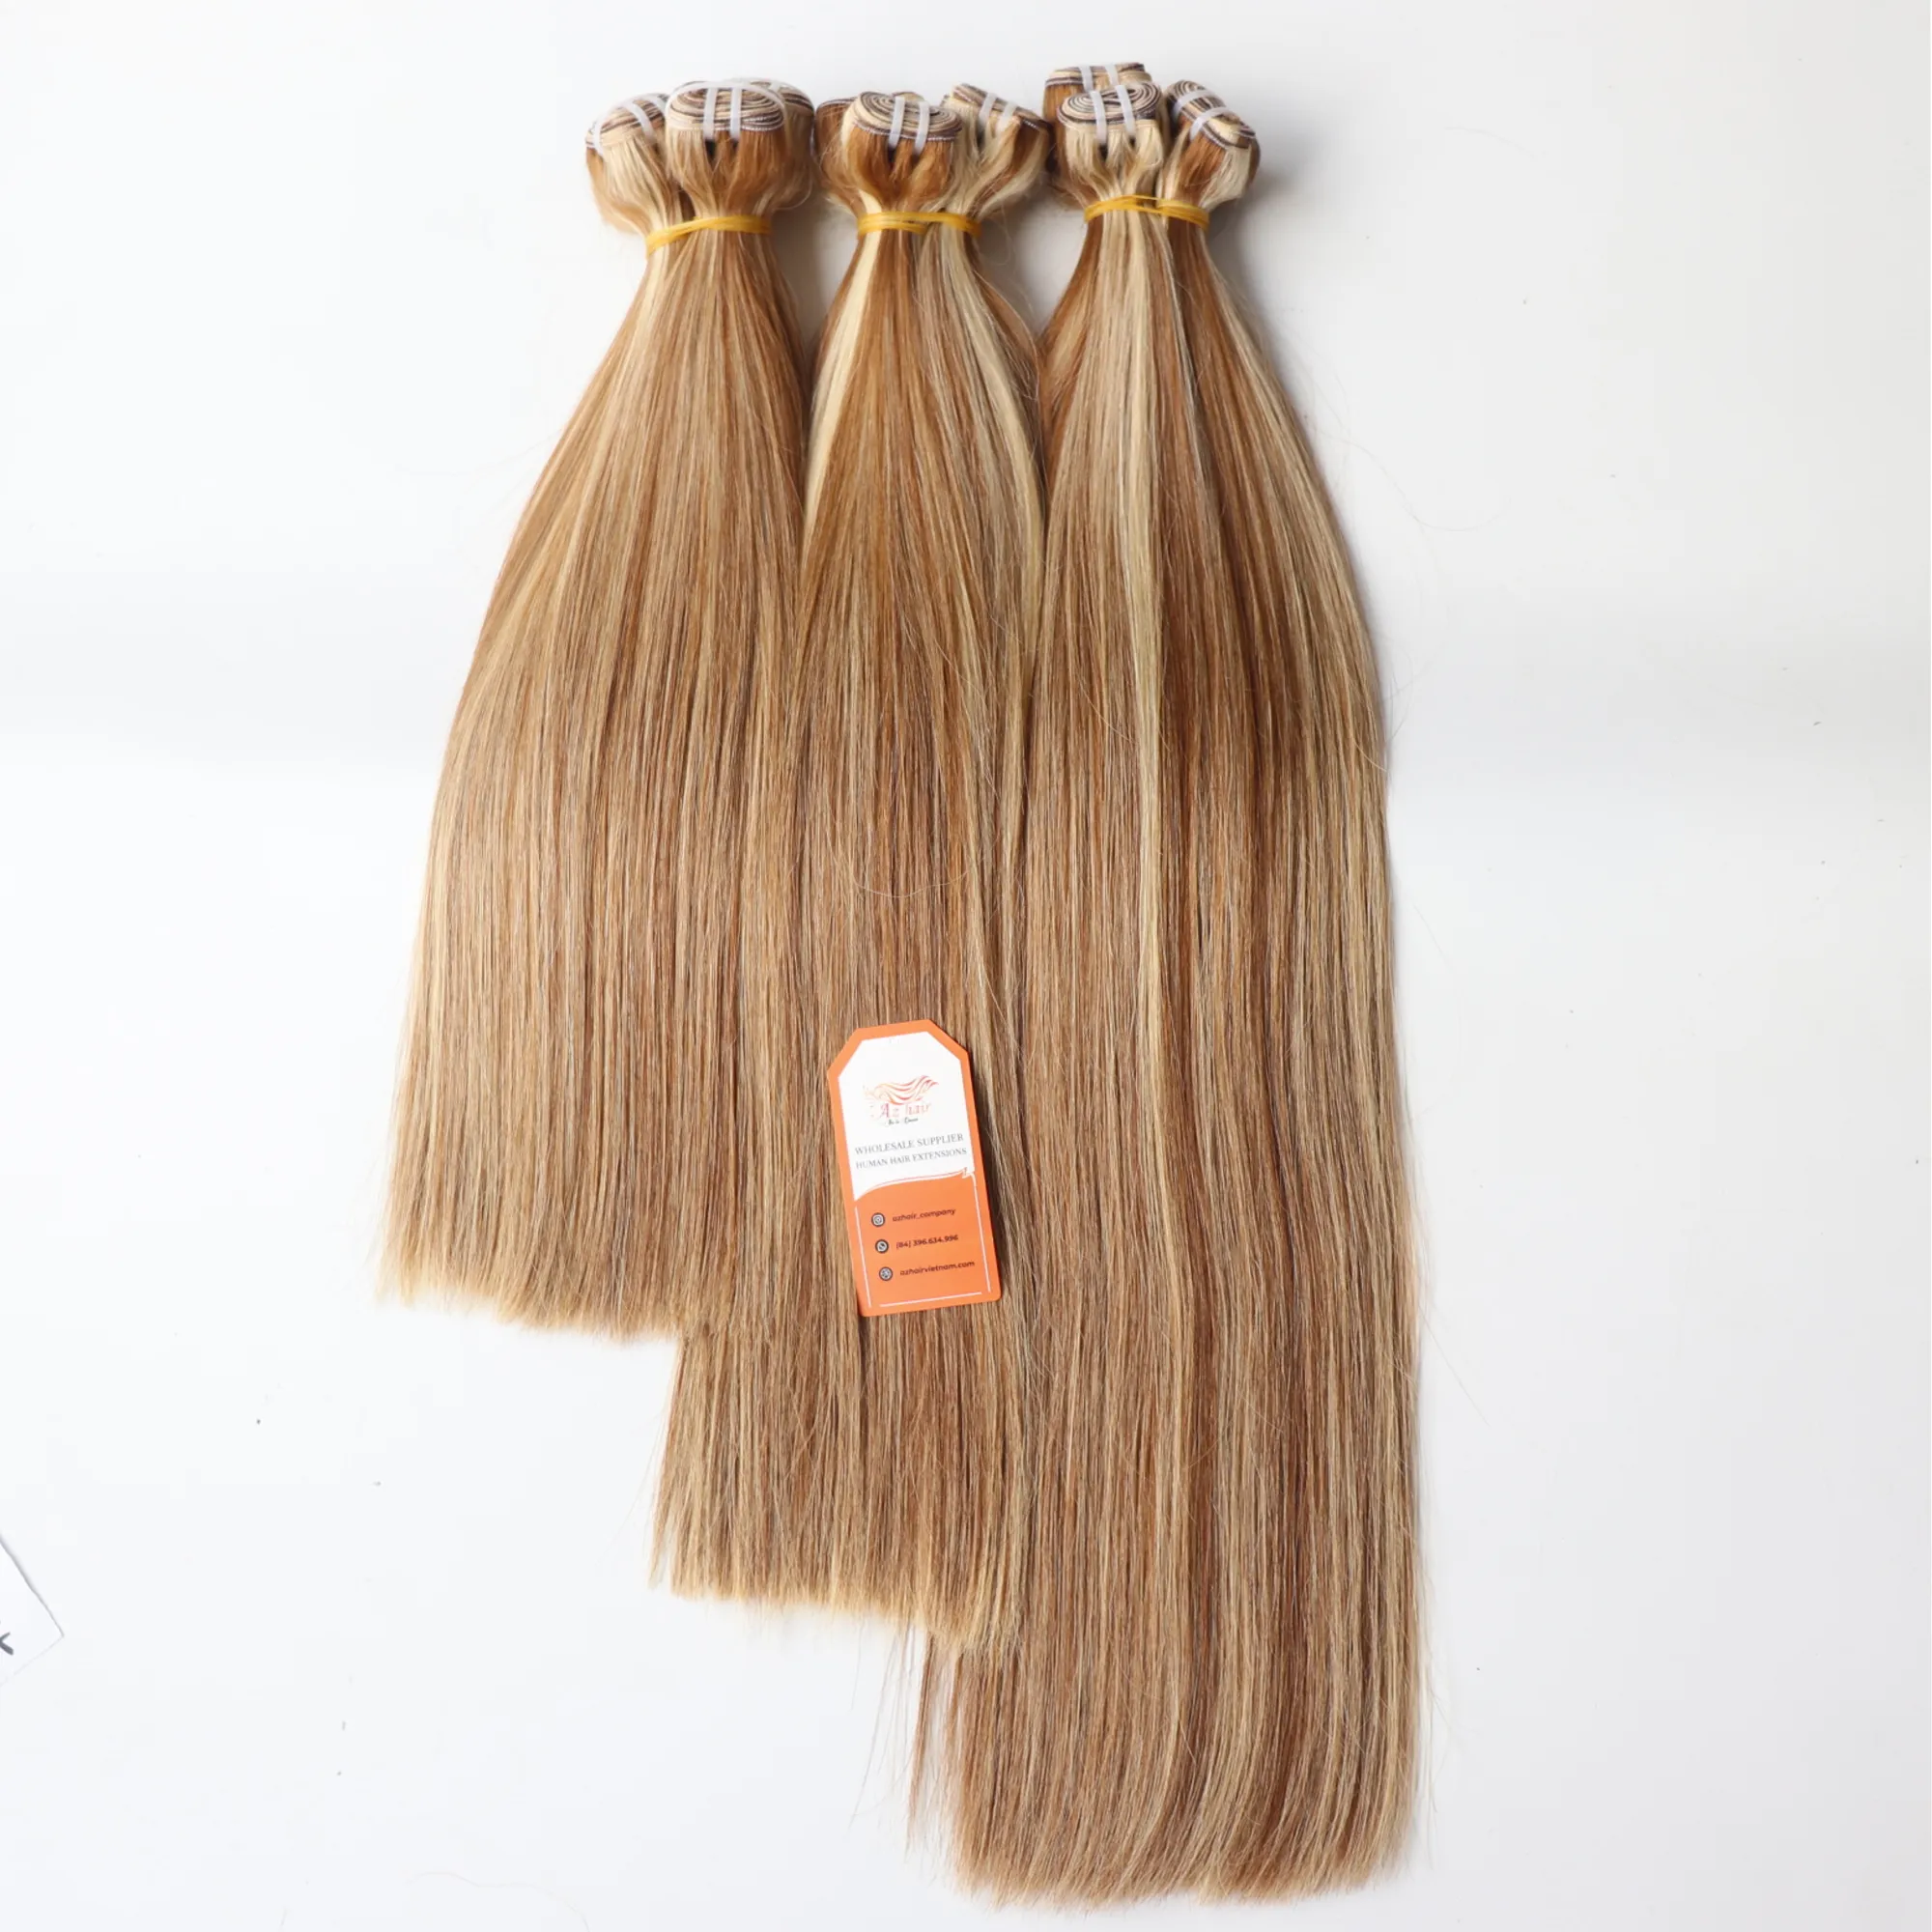 Weft Hair Extensions Straight Cheap Remy Human Hair Double Drawn With Best Wholesale Price Factory